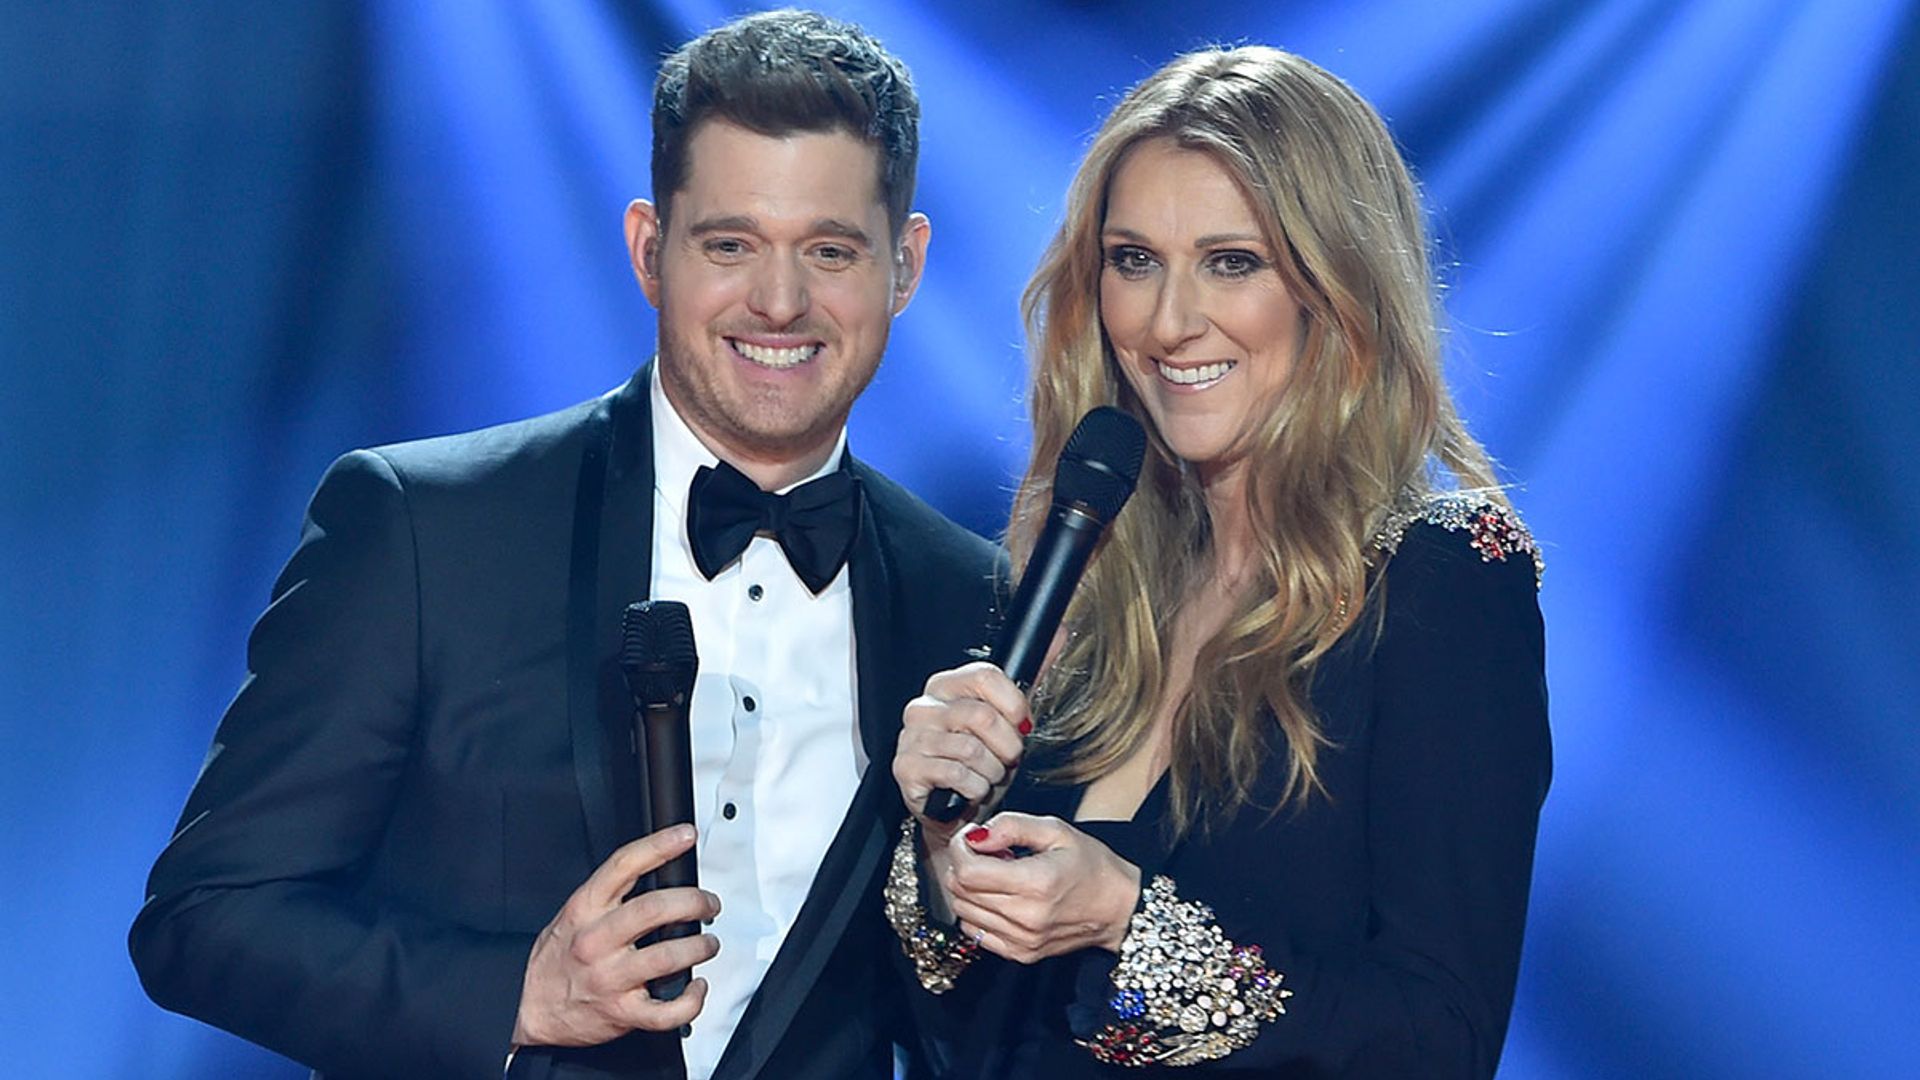 Celine Dion has the best reaction to Michael Buble's TikTok challenge featuring her song